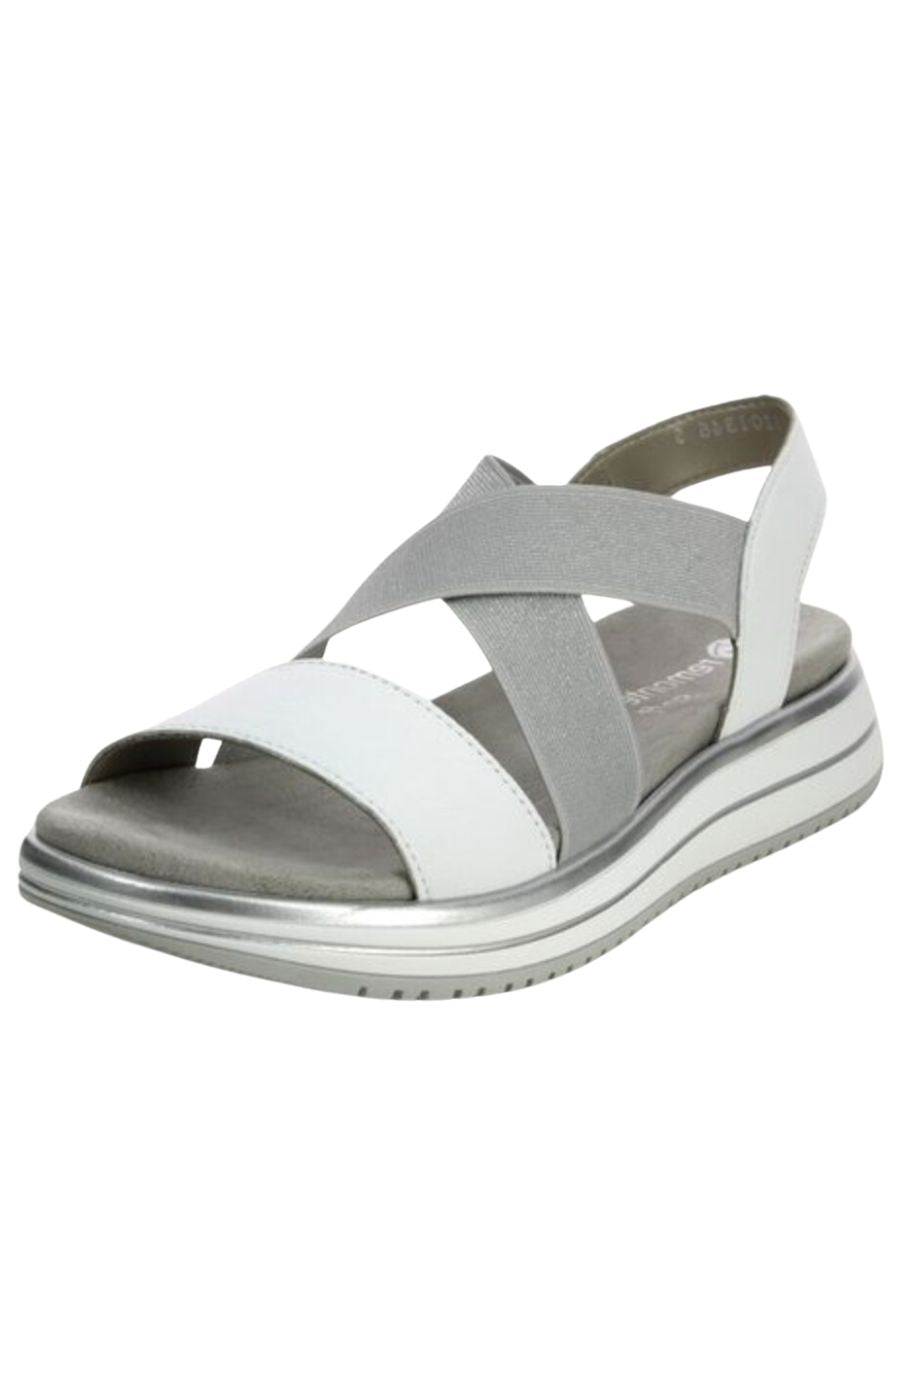 Remonte Wedge Sandal in Silver